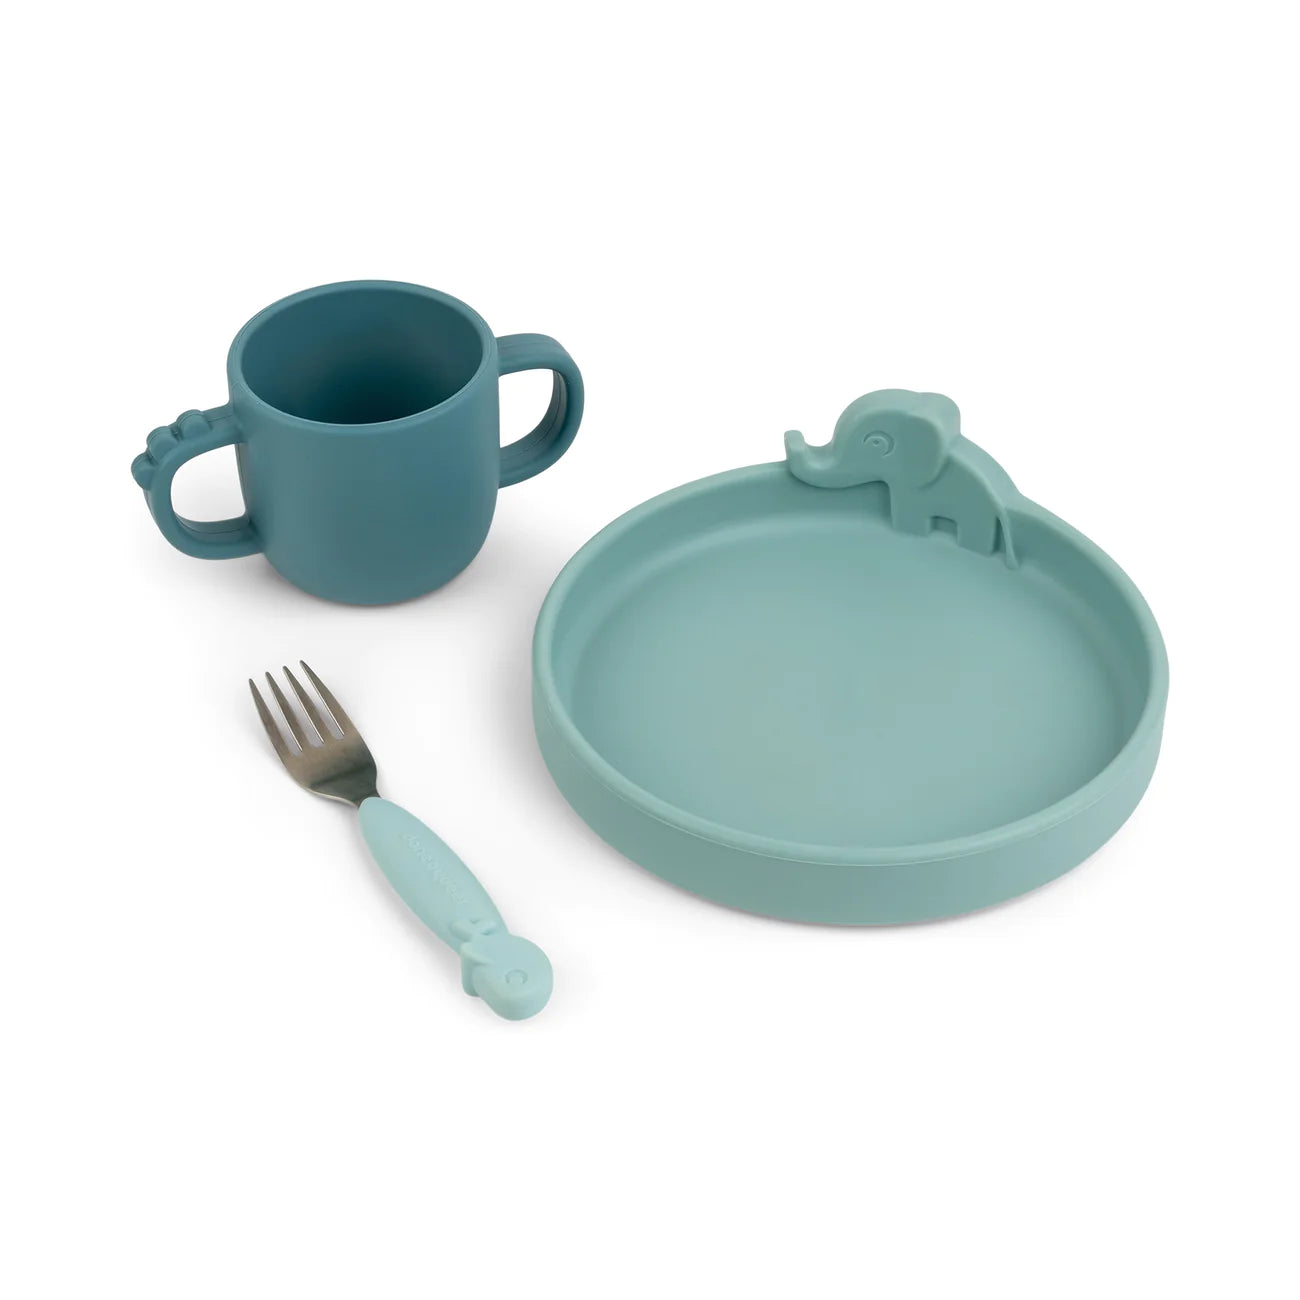 Silicone dinner set - Blue